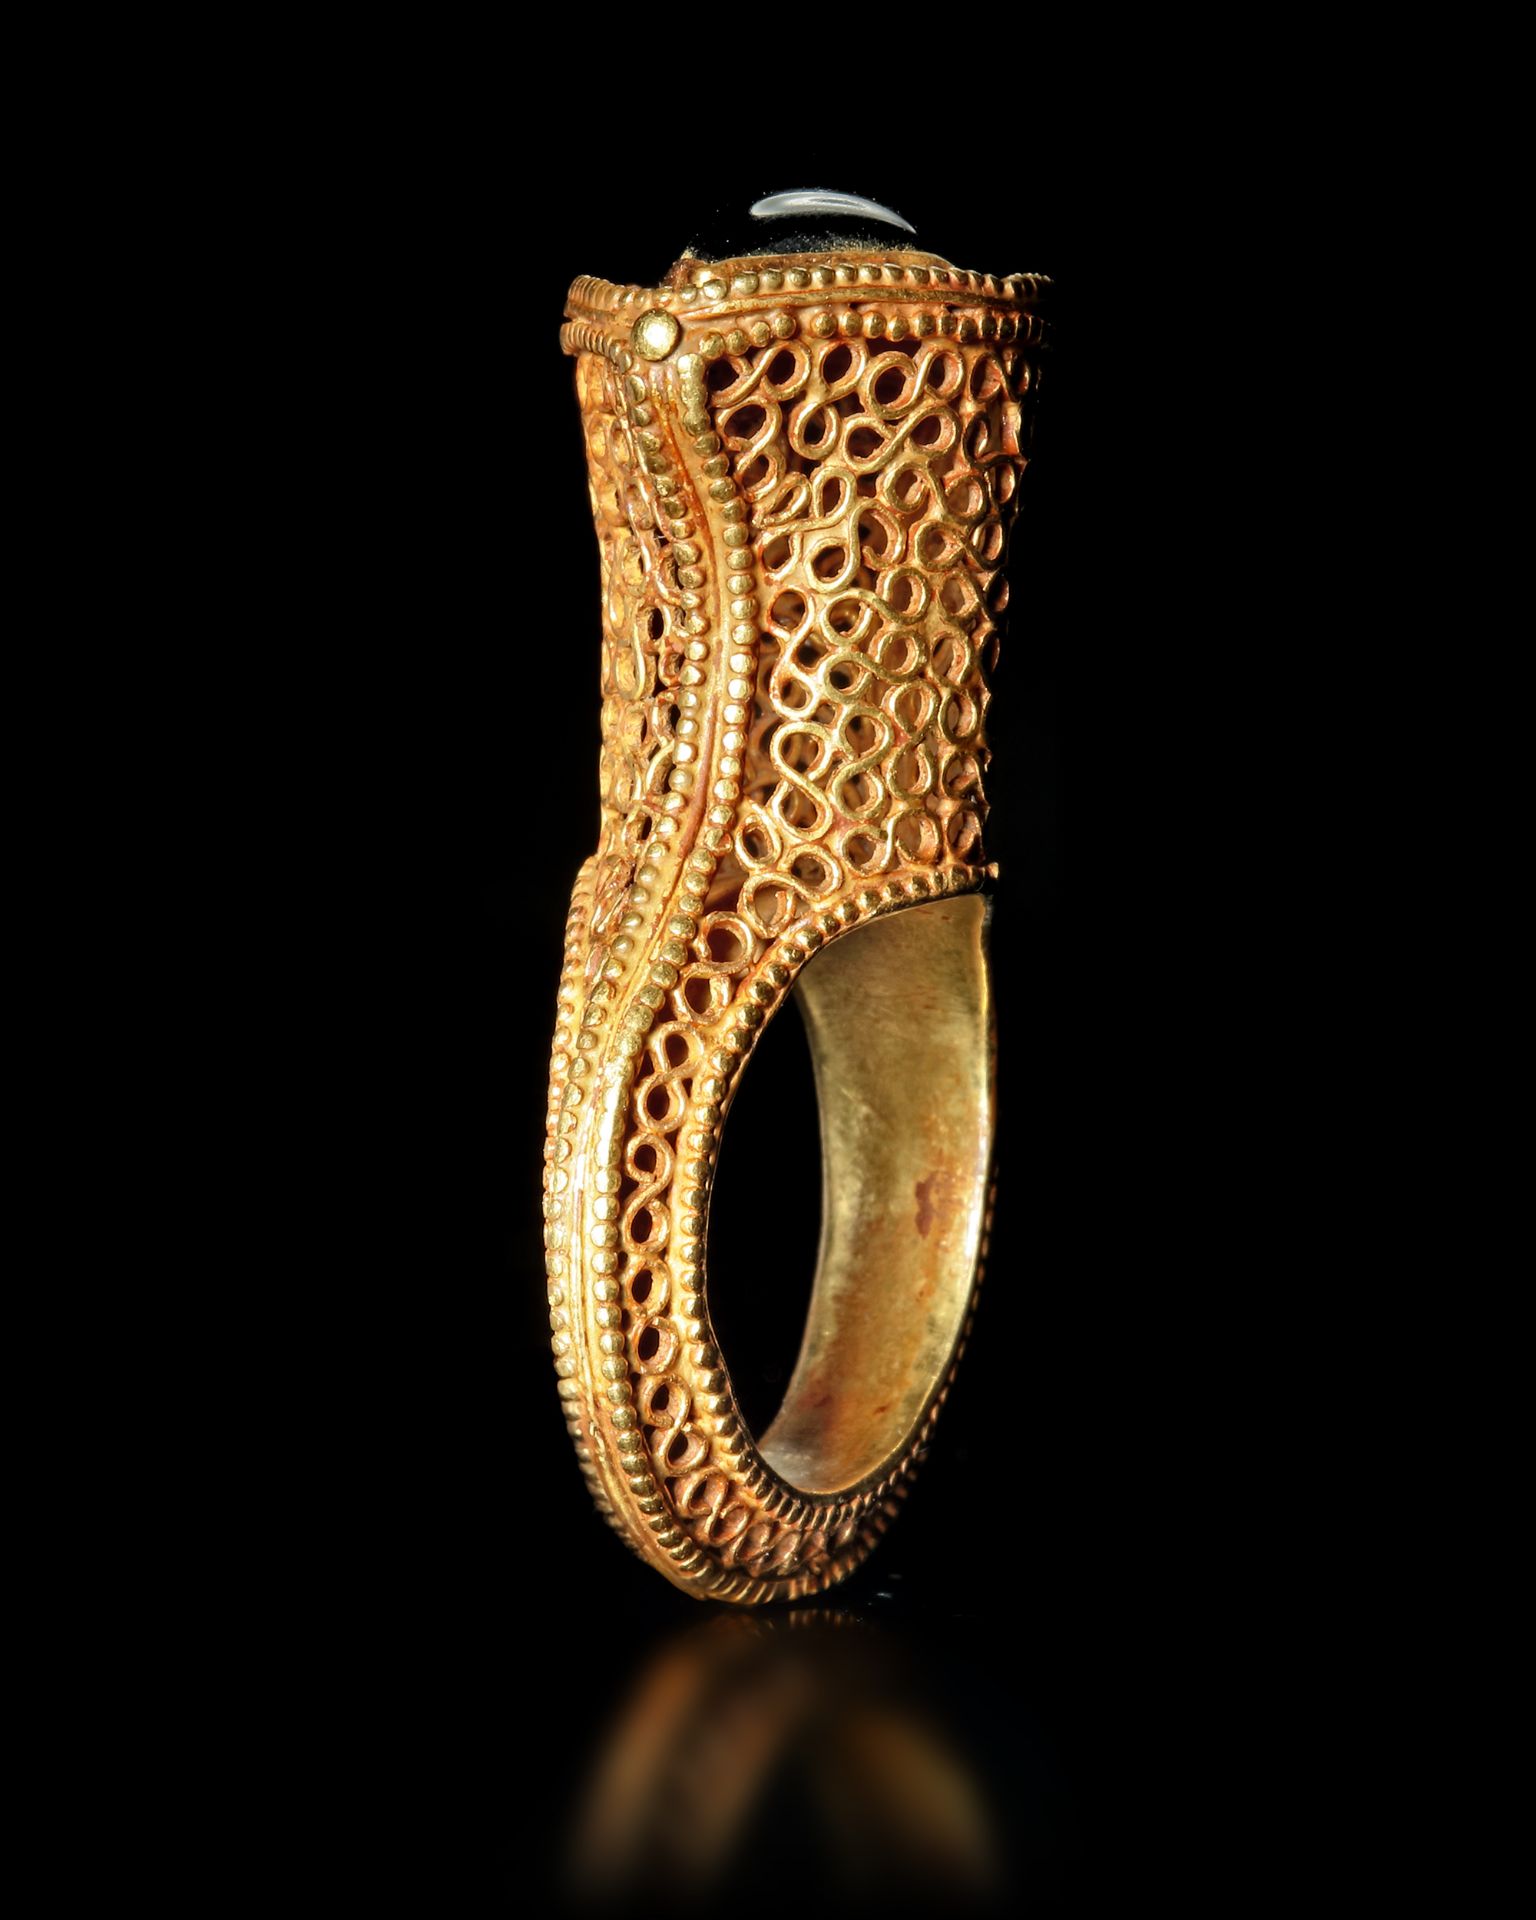 A MAGNIFICENT EARLY ISLAMIC GOLD RING, NEAR EAST 10TH-11TH CENTURY - Image 3 of 4